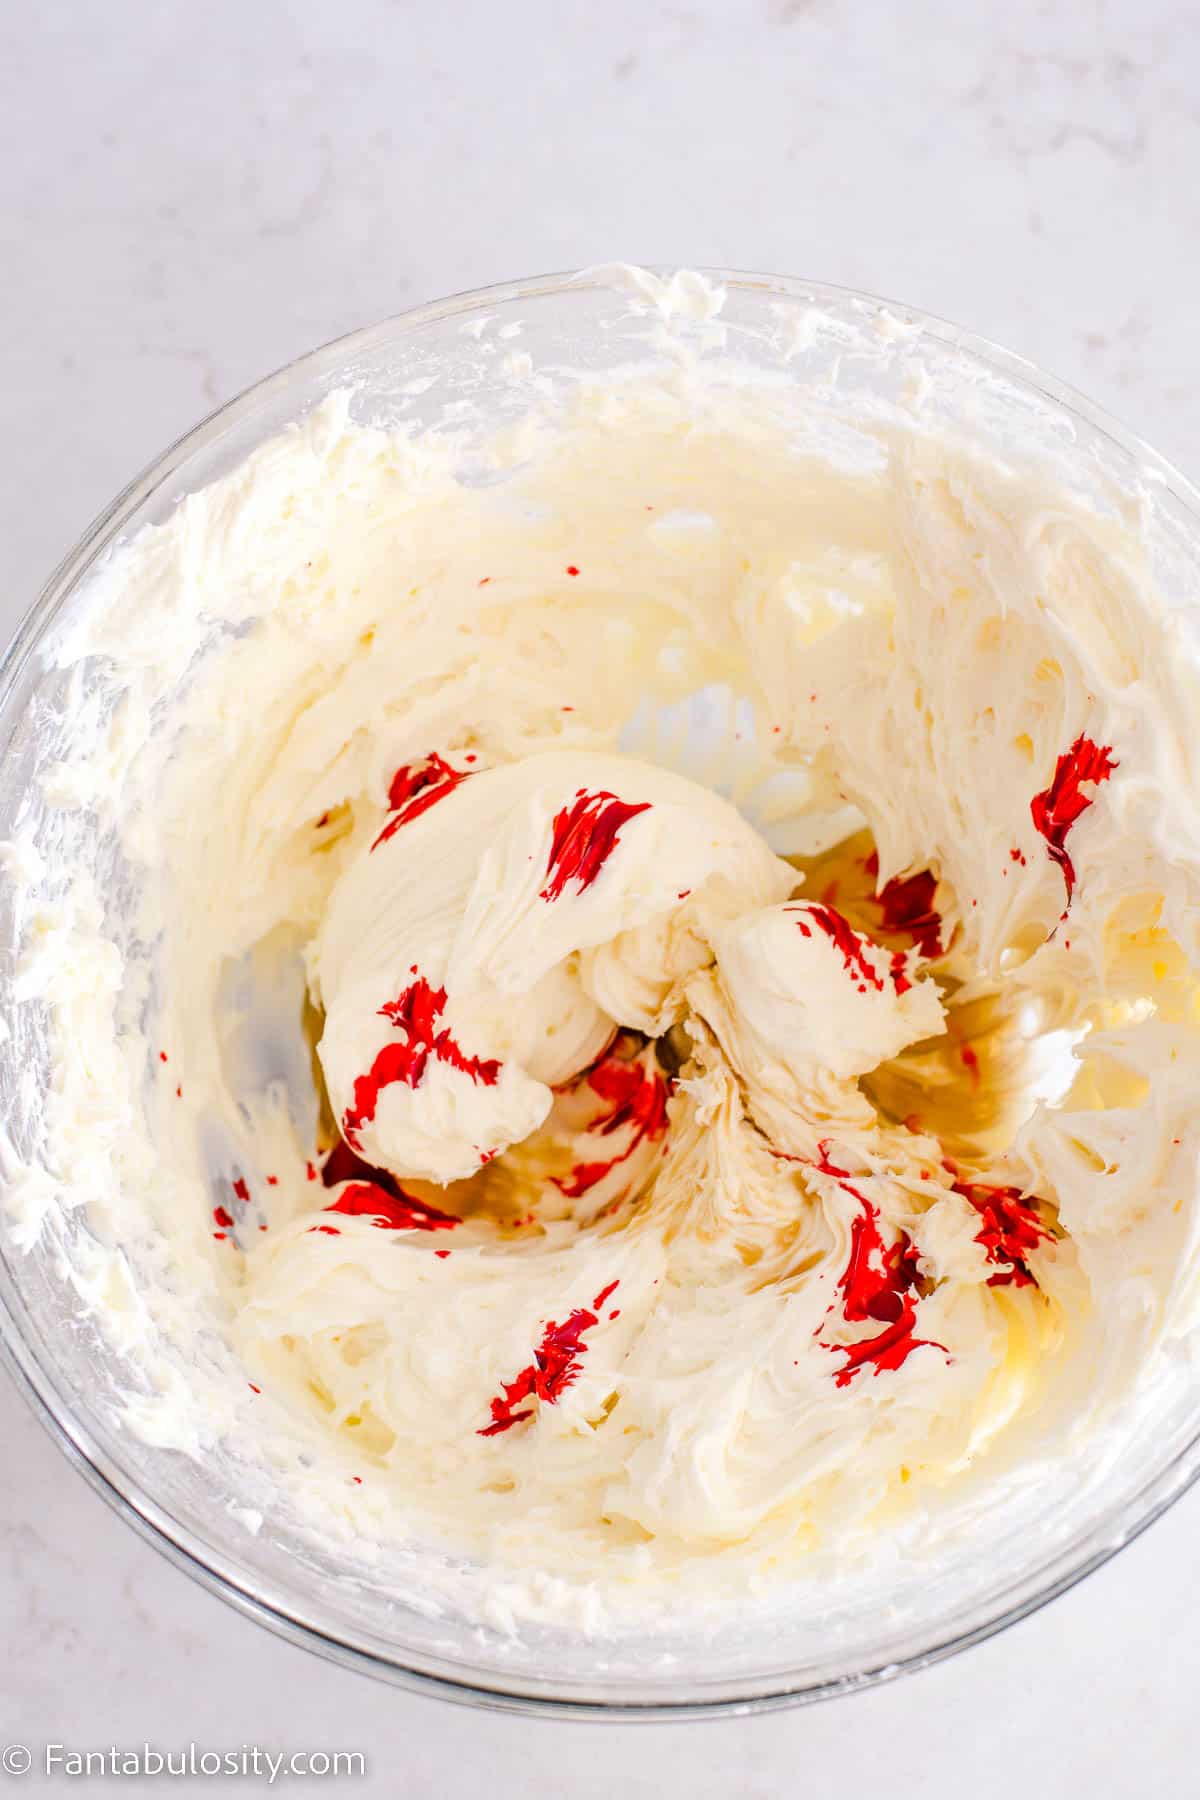 Red food coloring drops in cream cheese mixture, in glass bowl